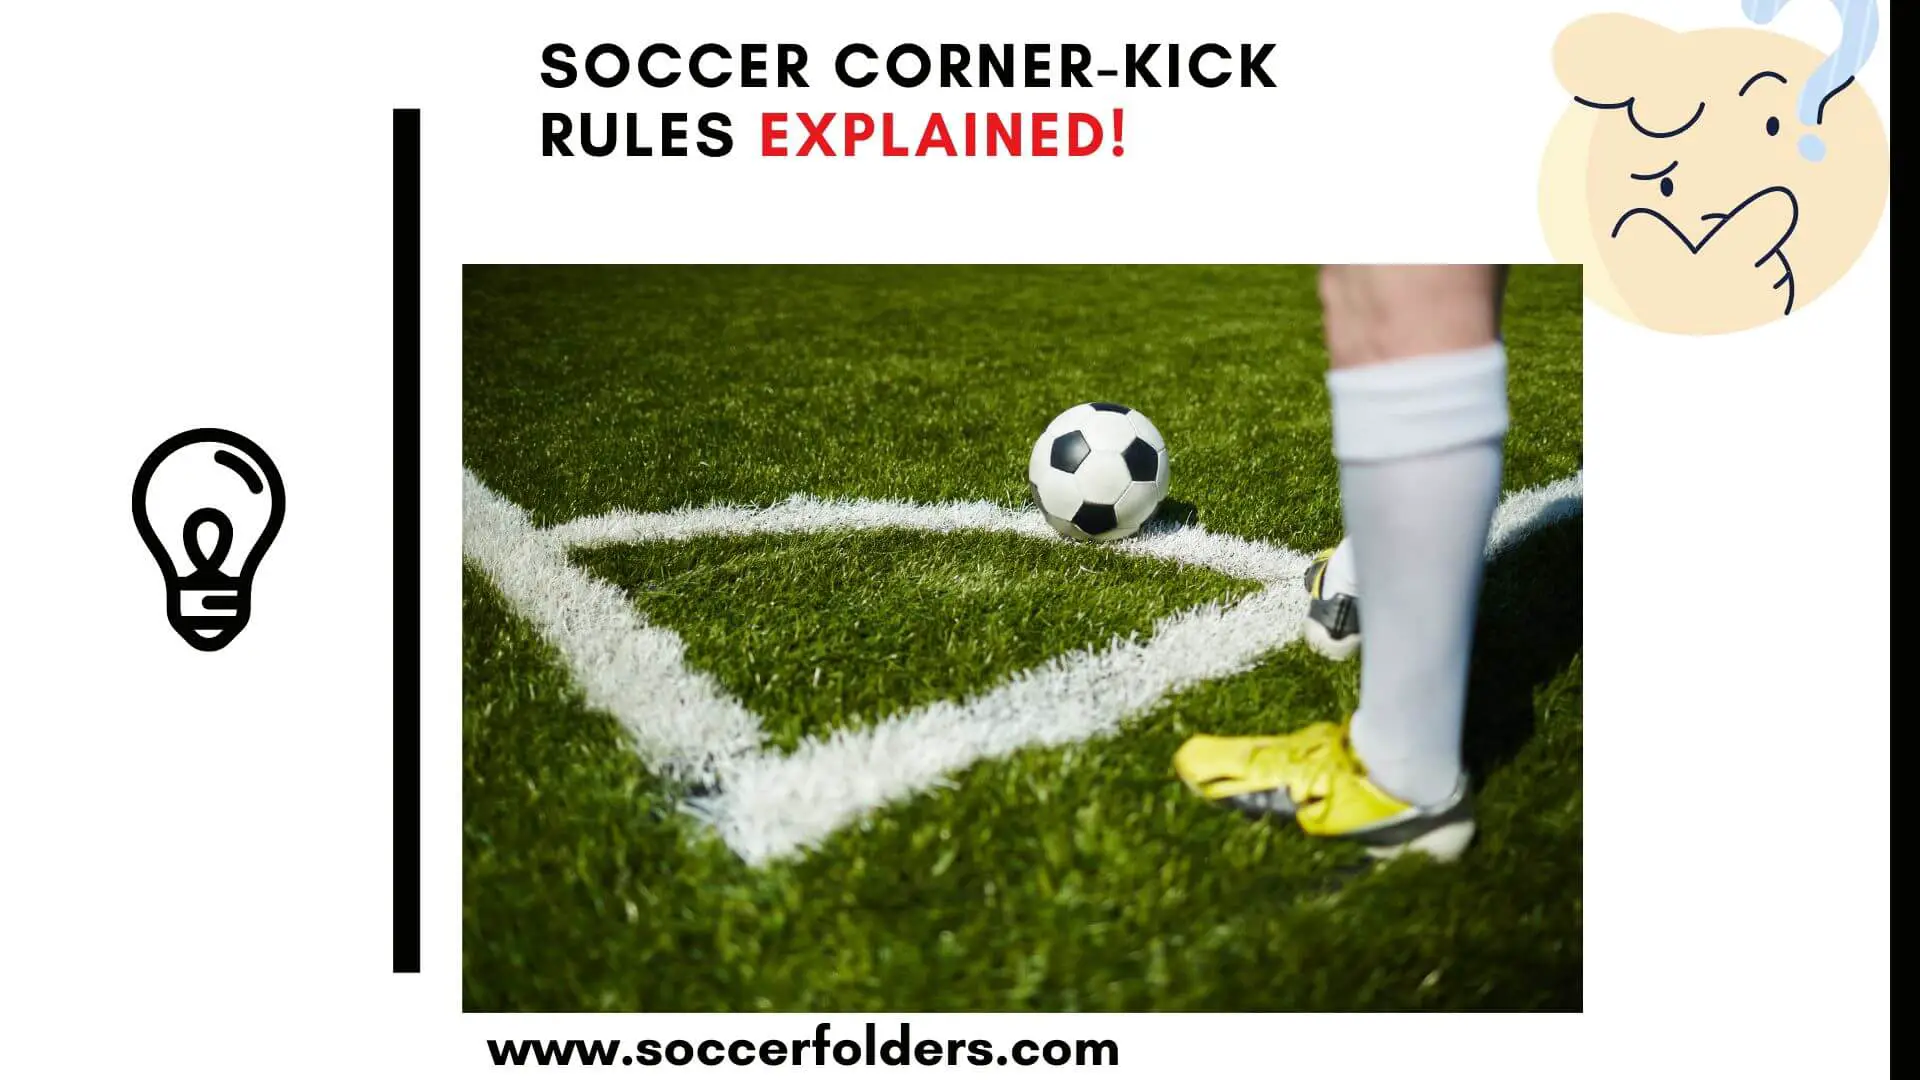 Soccer corner kick rules - Featured image